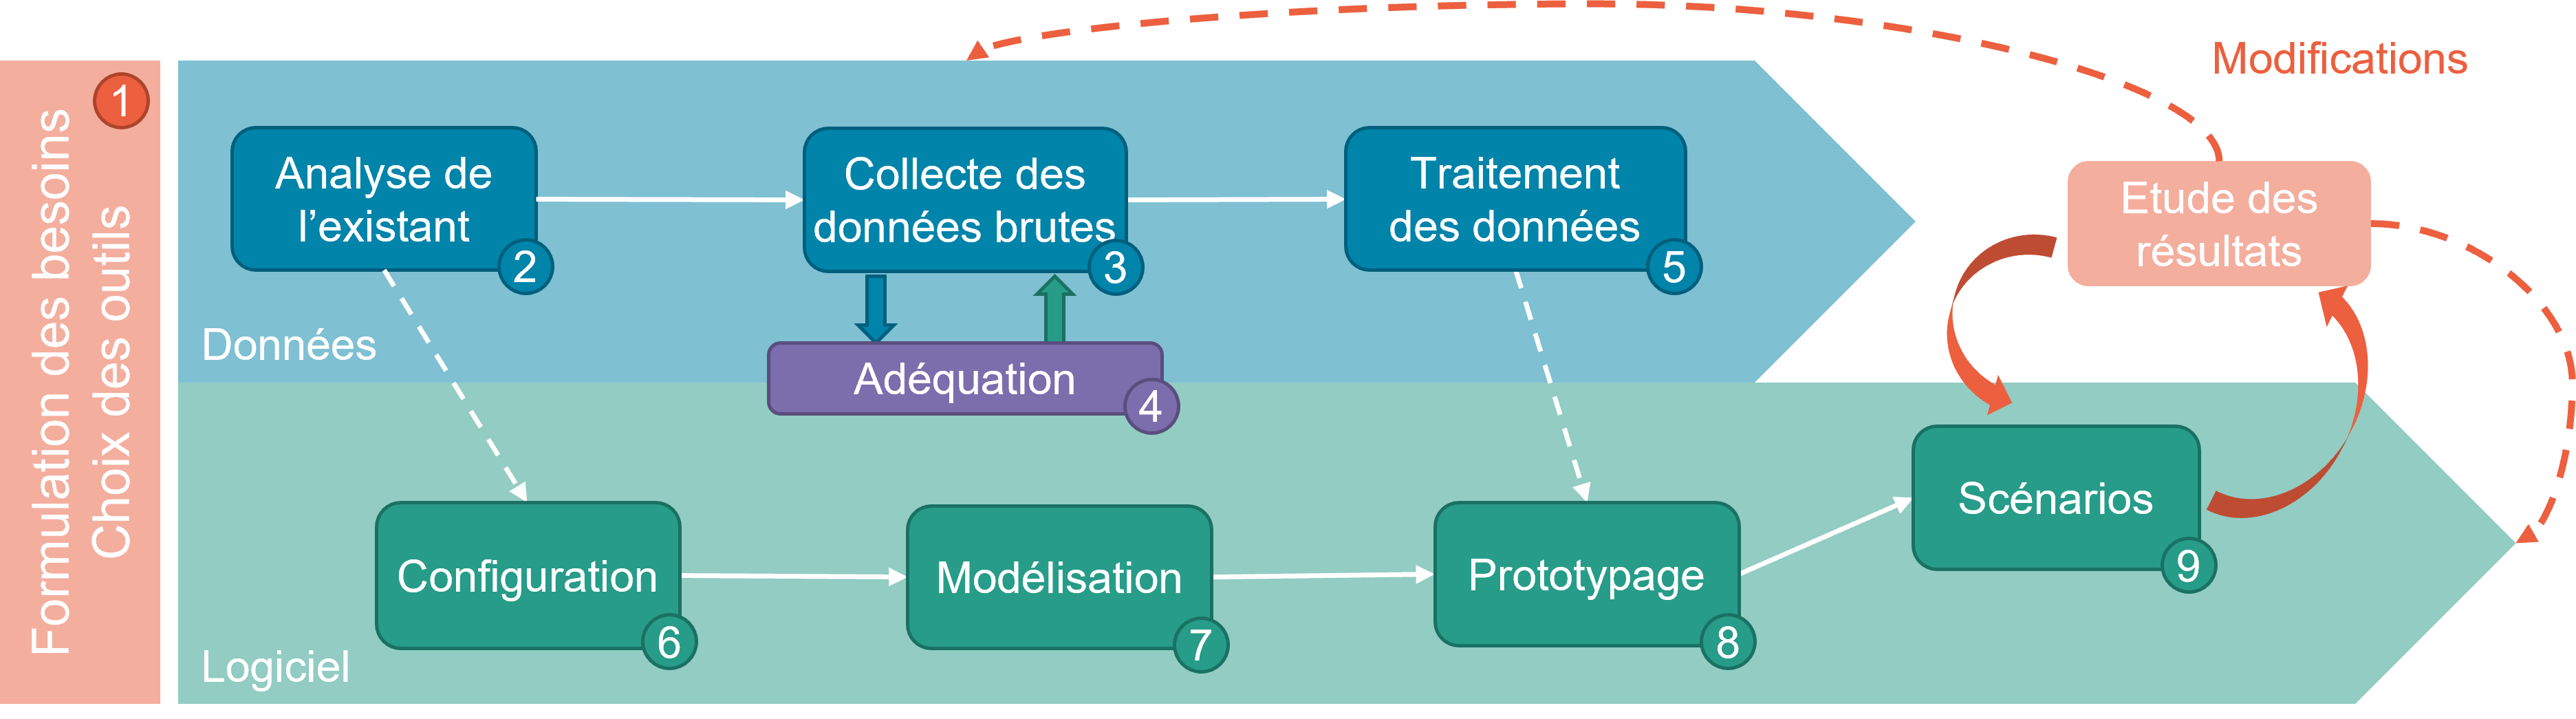 3069-French_Diagram.png